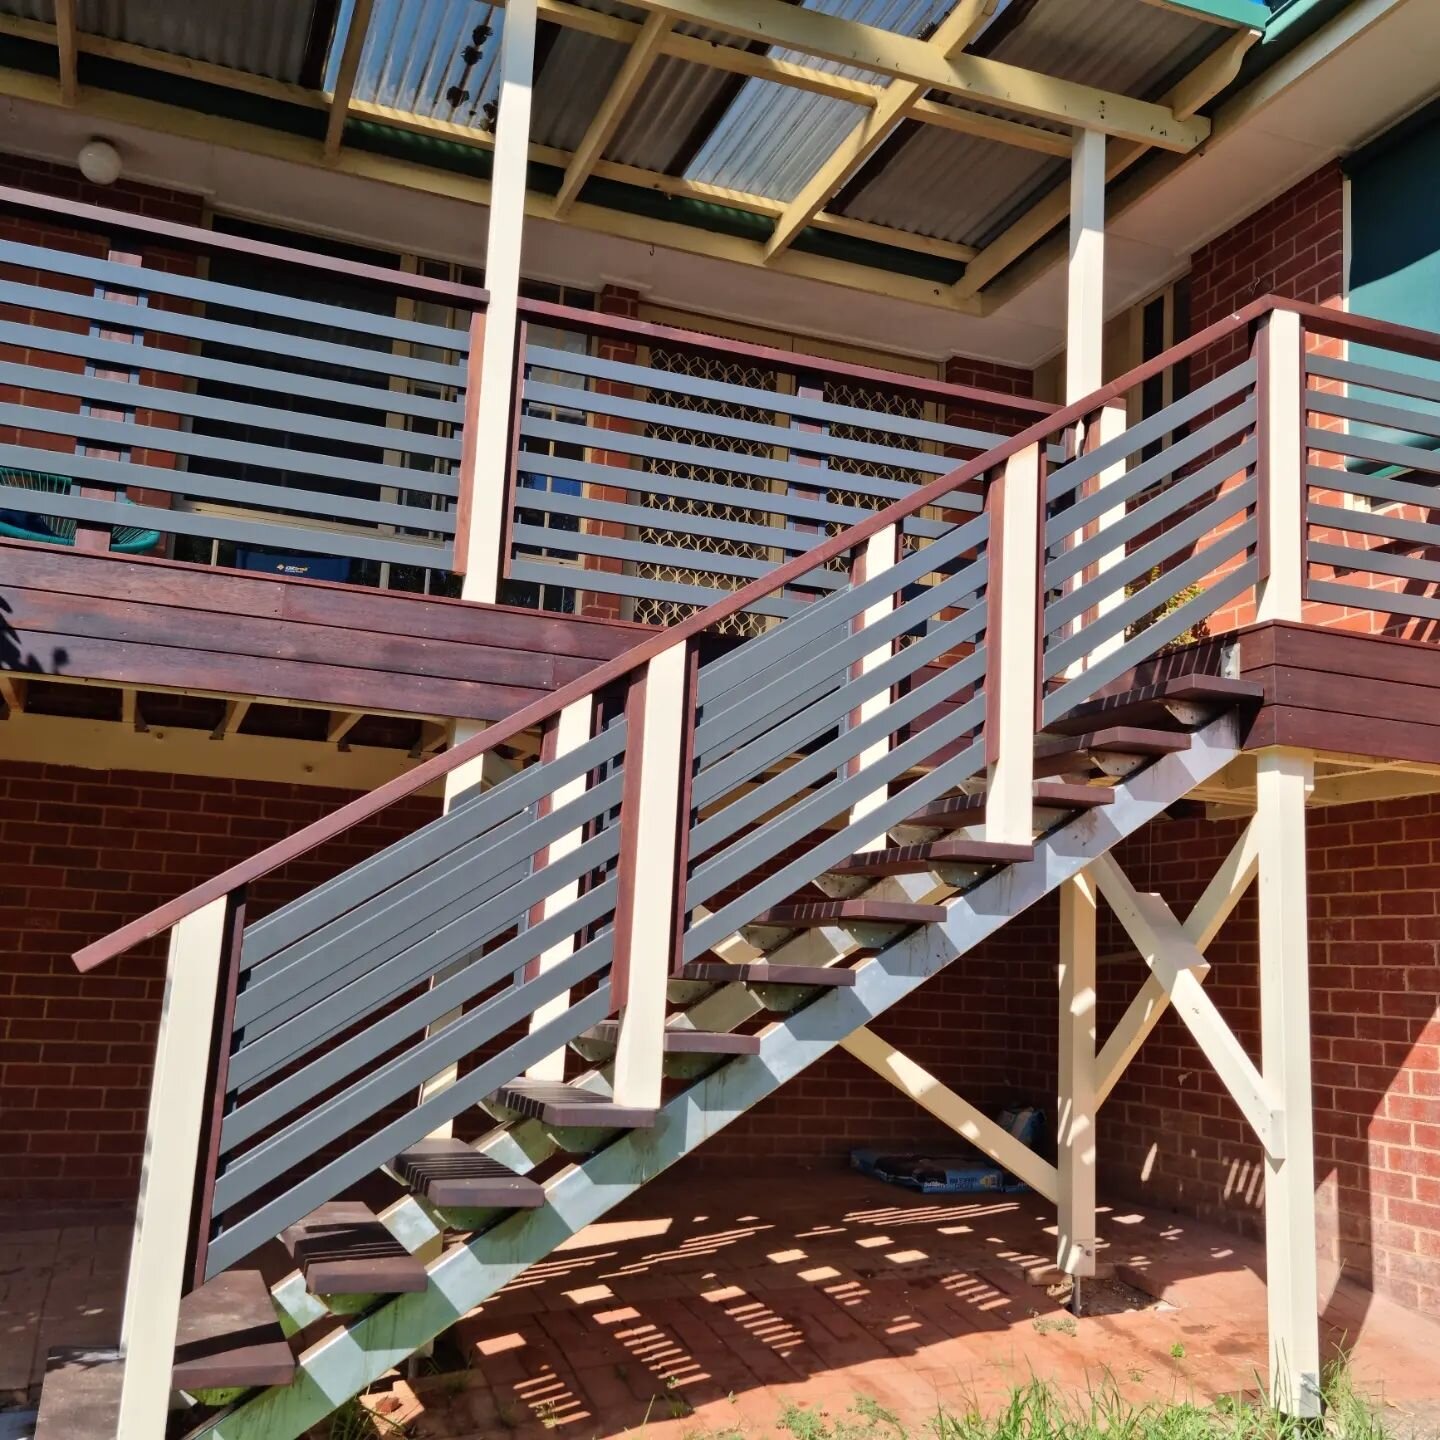 Full deck rebuild completed in time to enjoy the rest of the summer

#alburywodonga #albury #carpentry #carpentryandjoinery #restoration #renovation